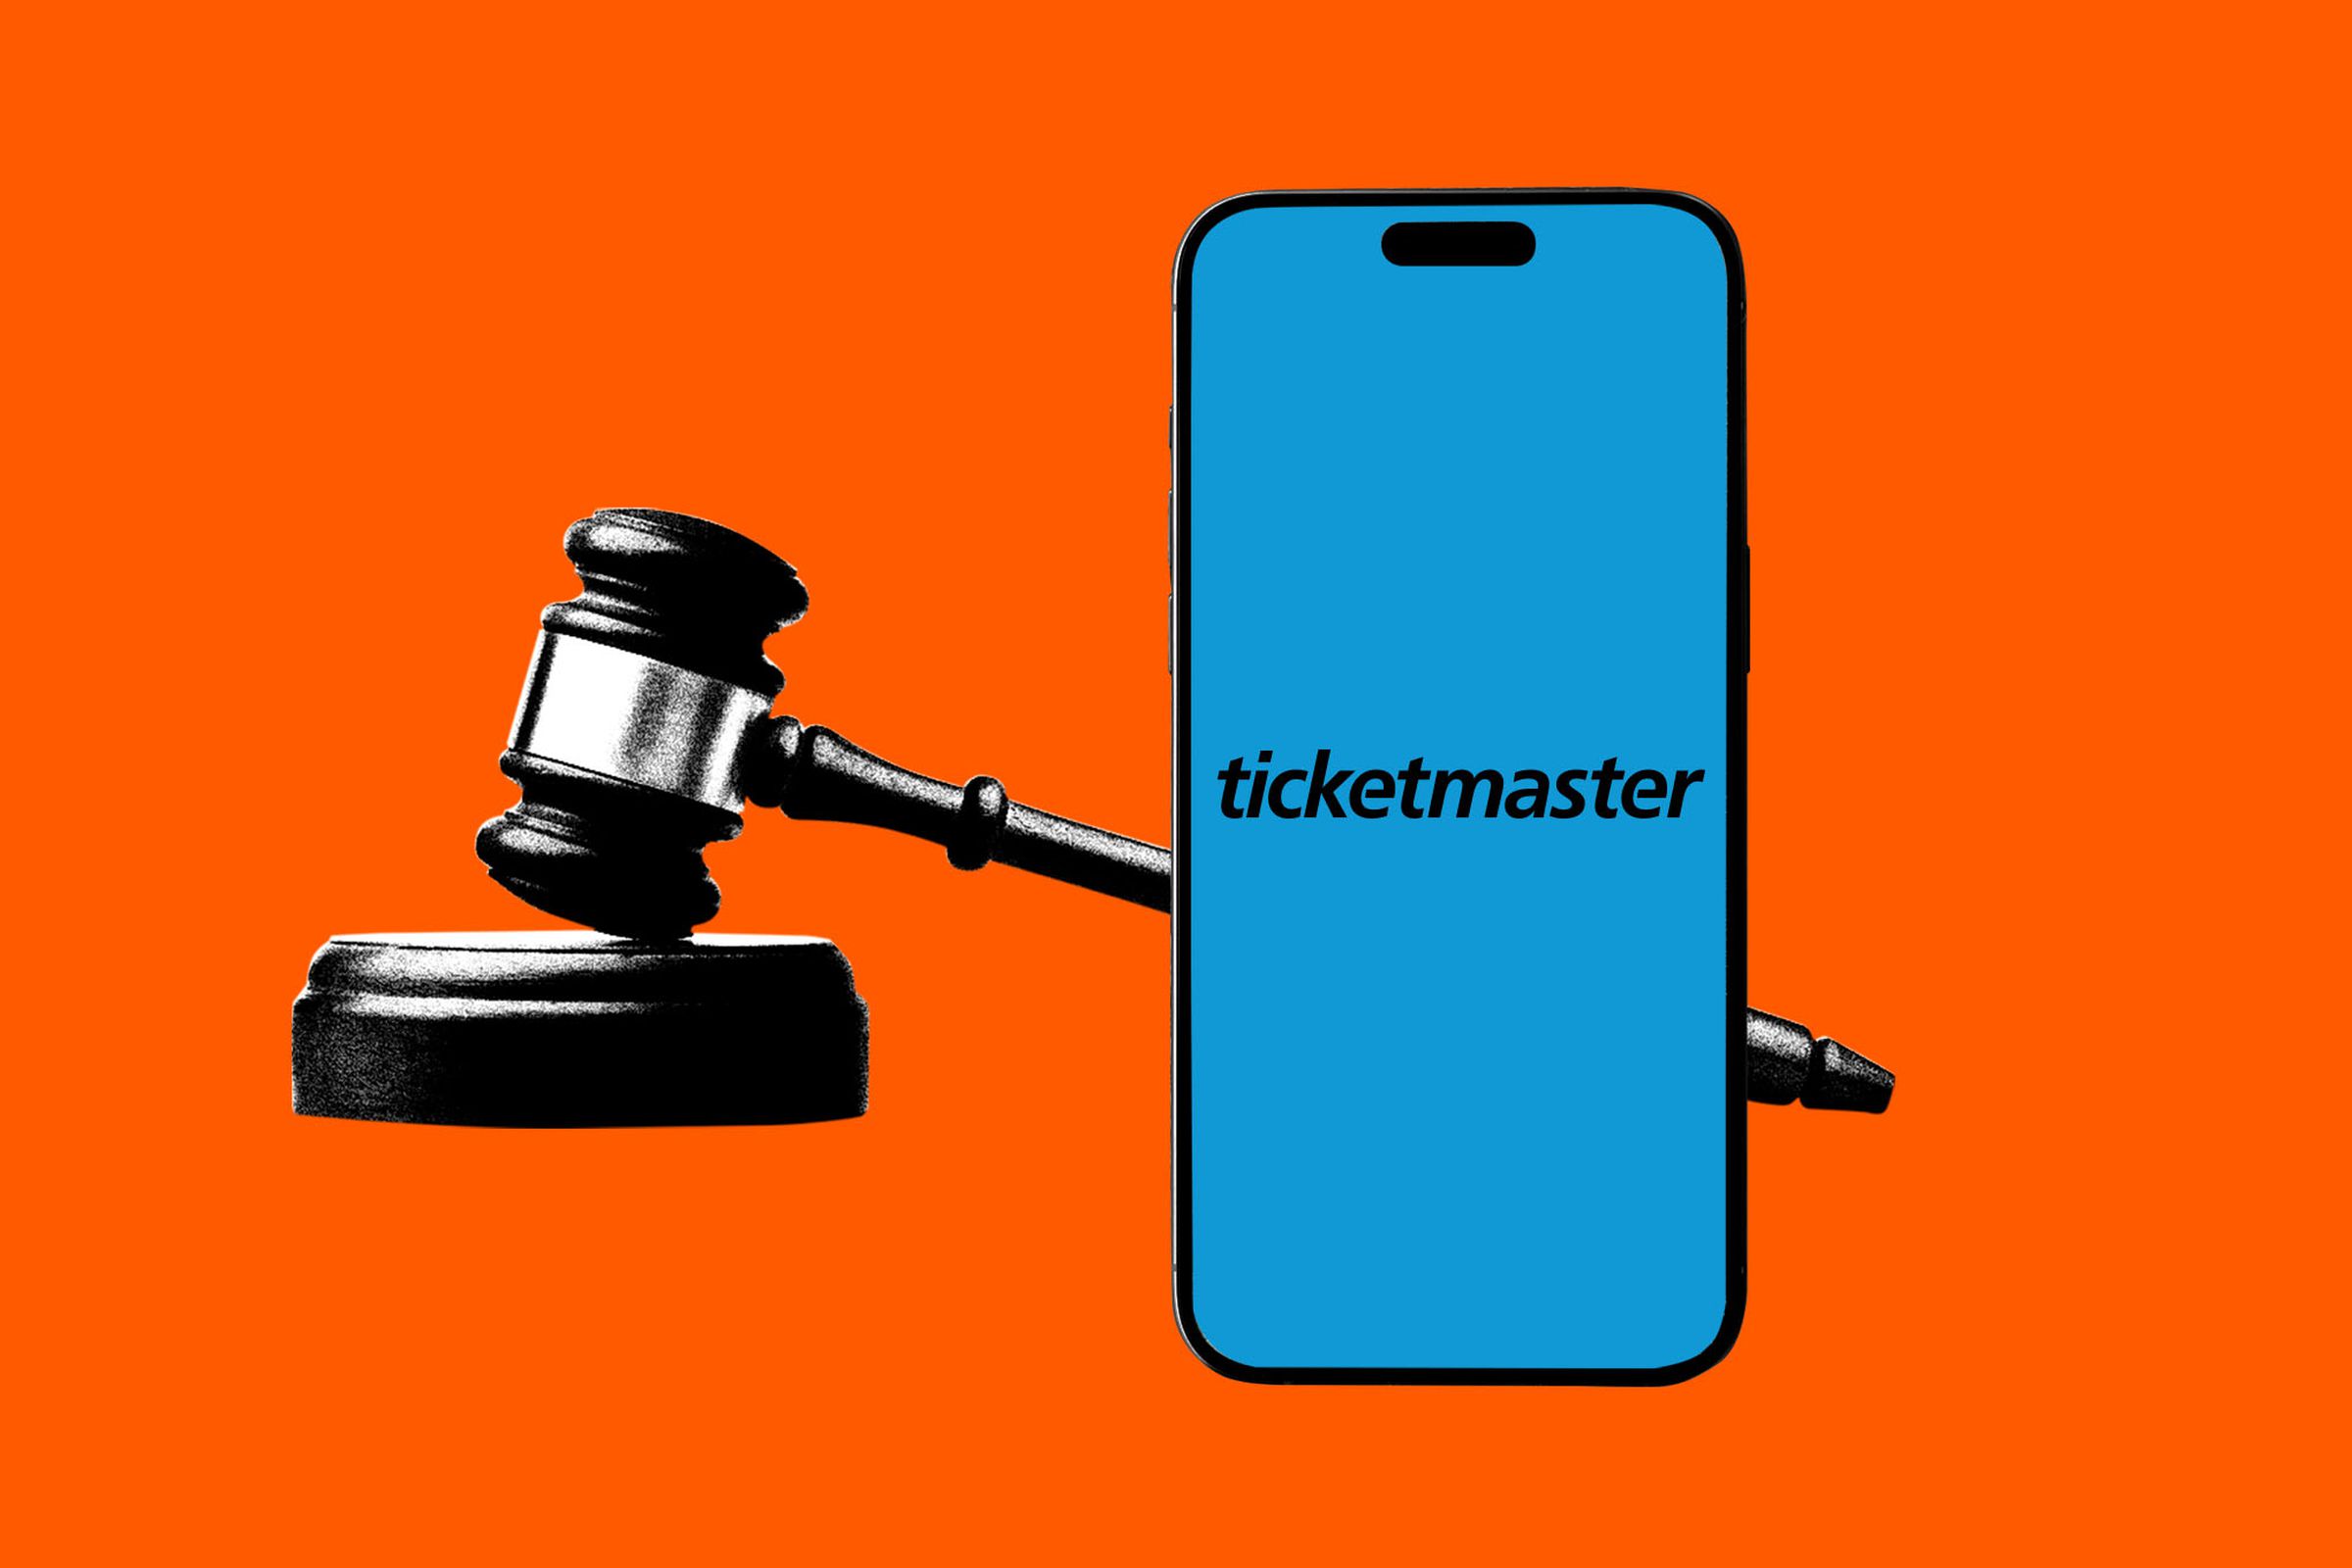 Photo illustration of a gavel next to a phone showing the Ticketmaster logo.